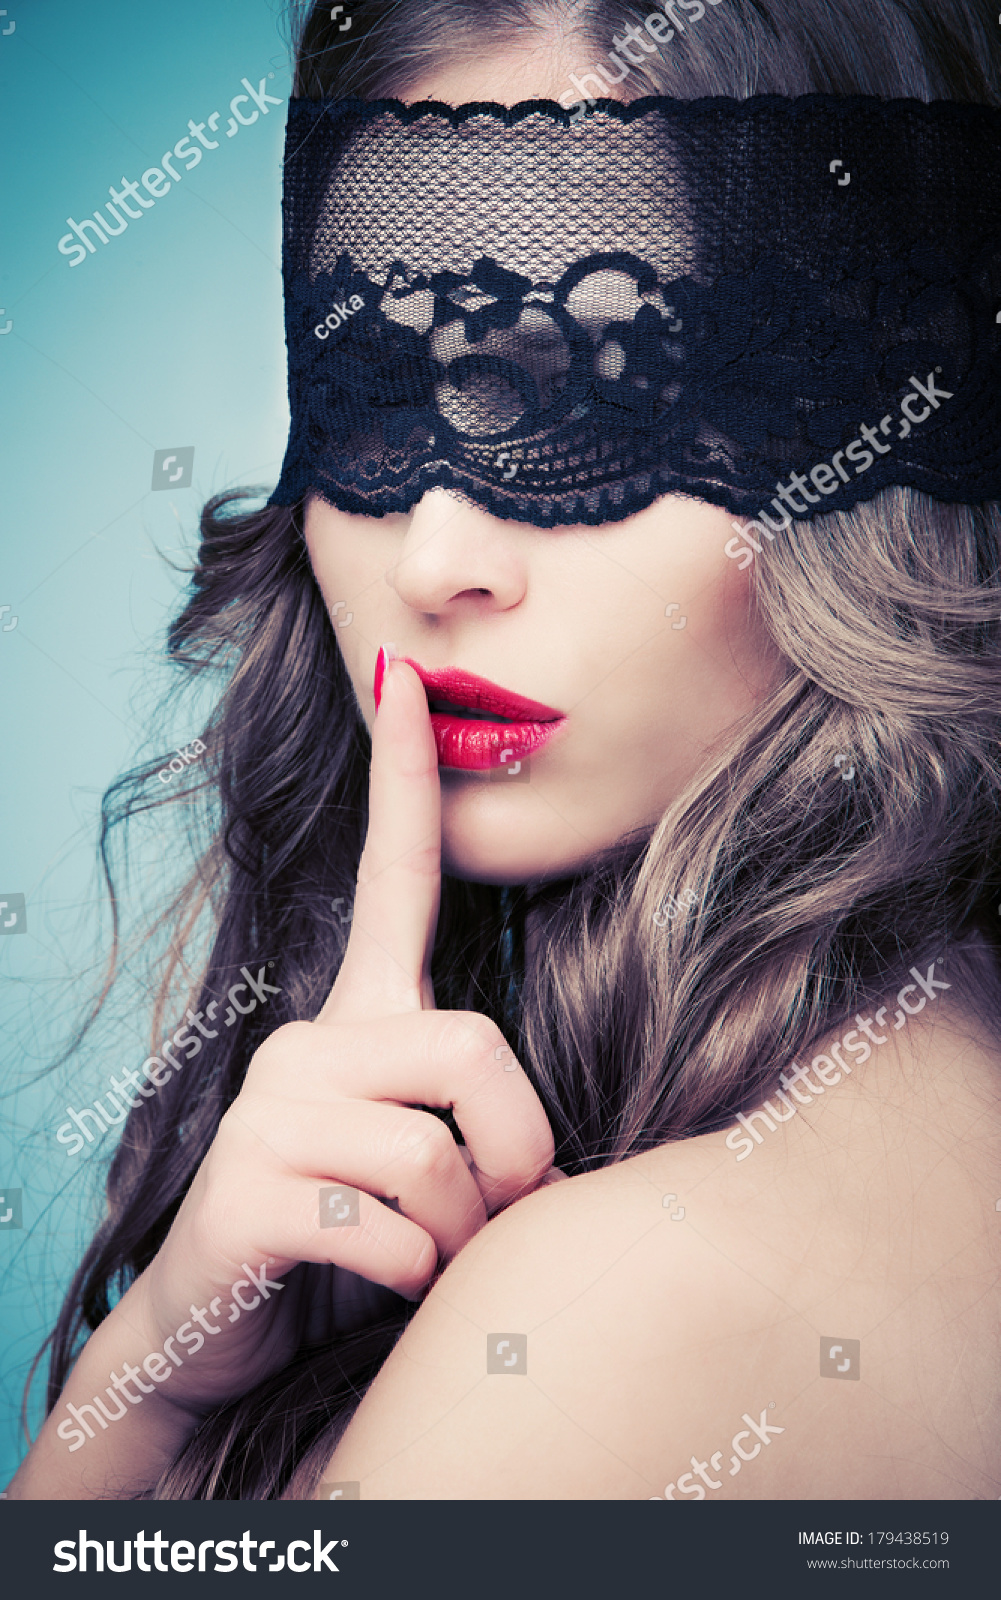 stock-photo-woman-with-black-lace-over-eyes-gesturing-silence-179438519.jpg